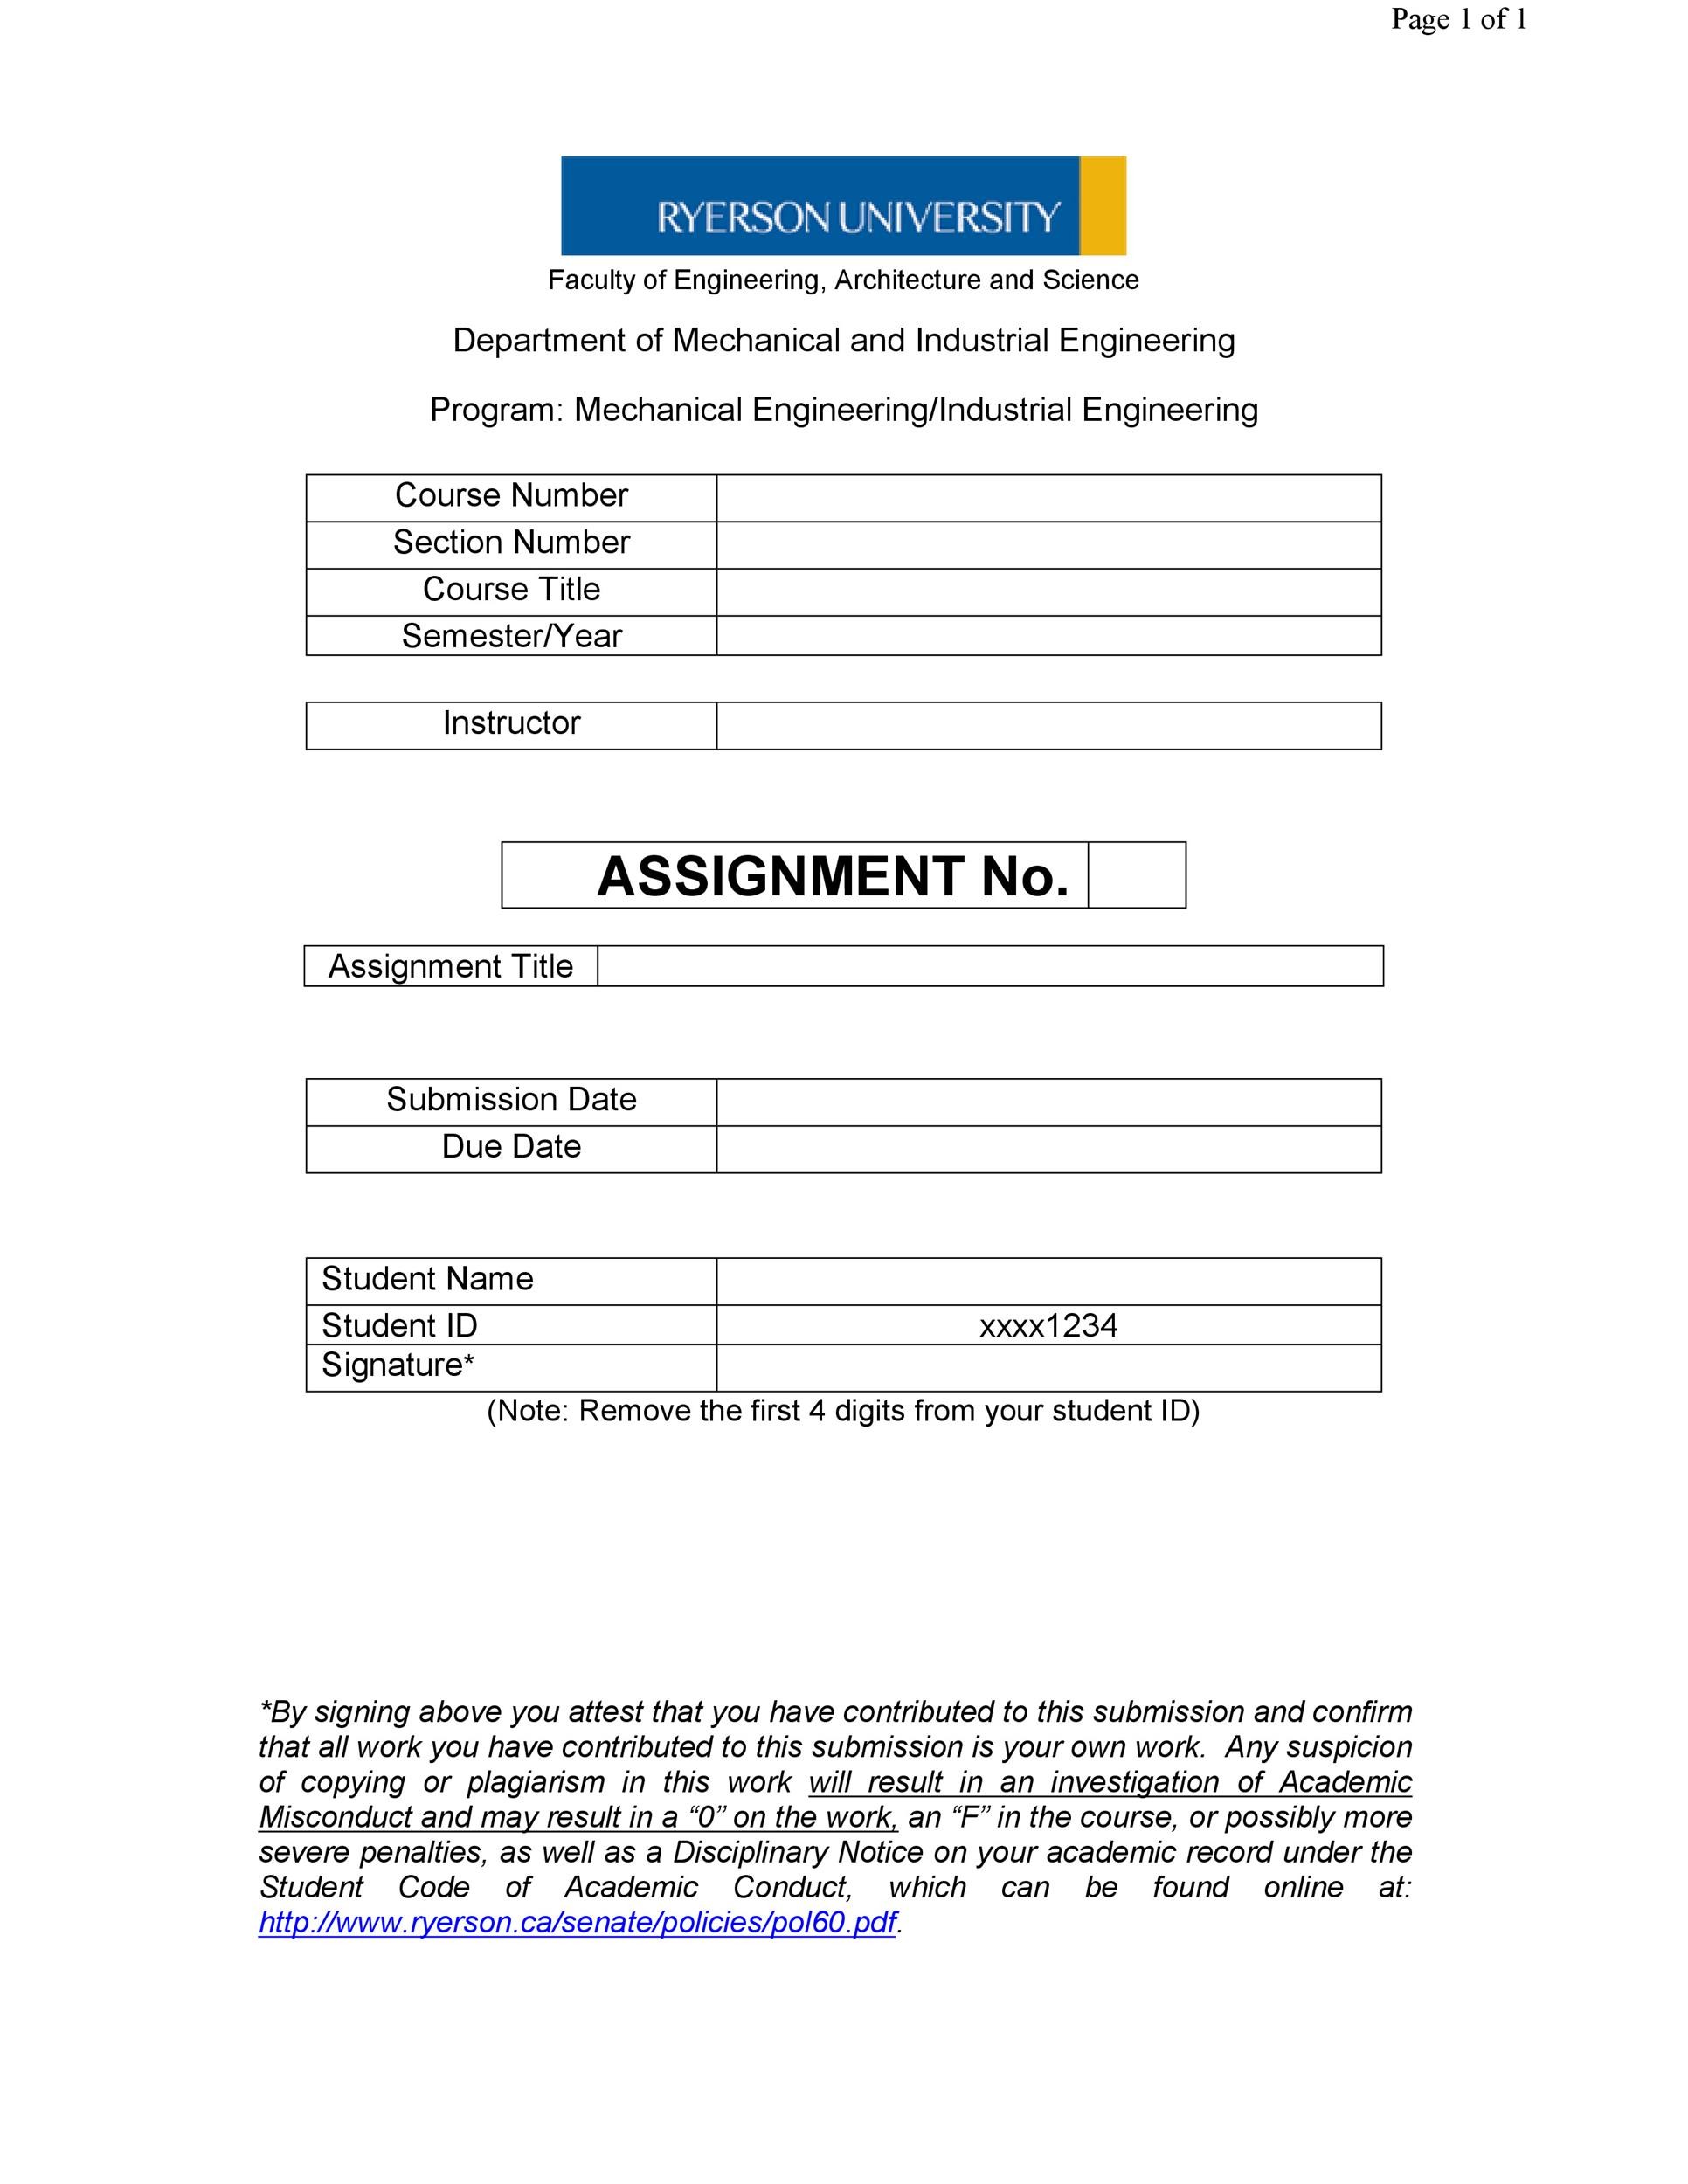 Assignment Template Word from templatelab.com